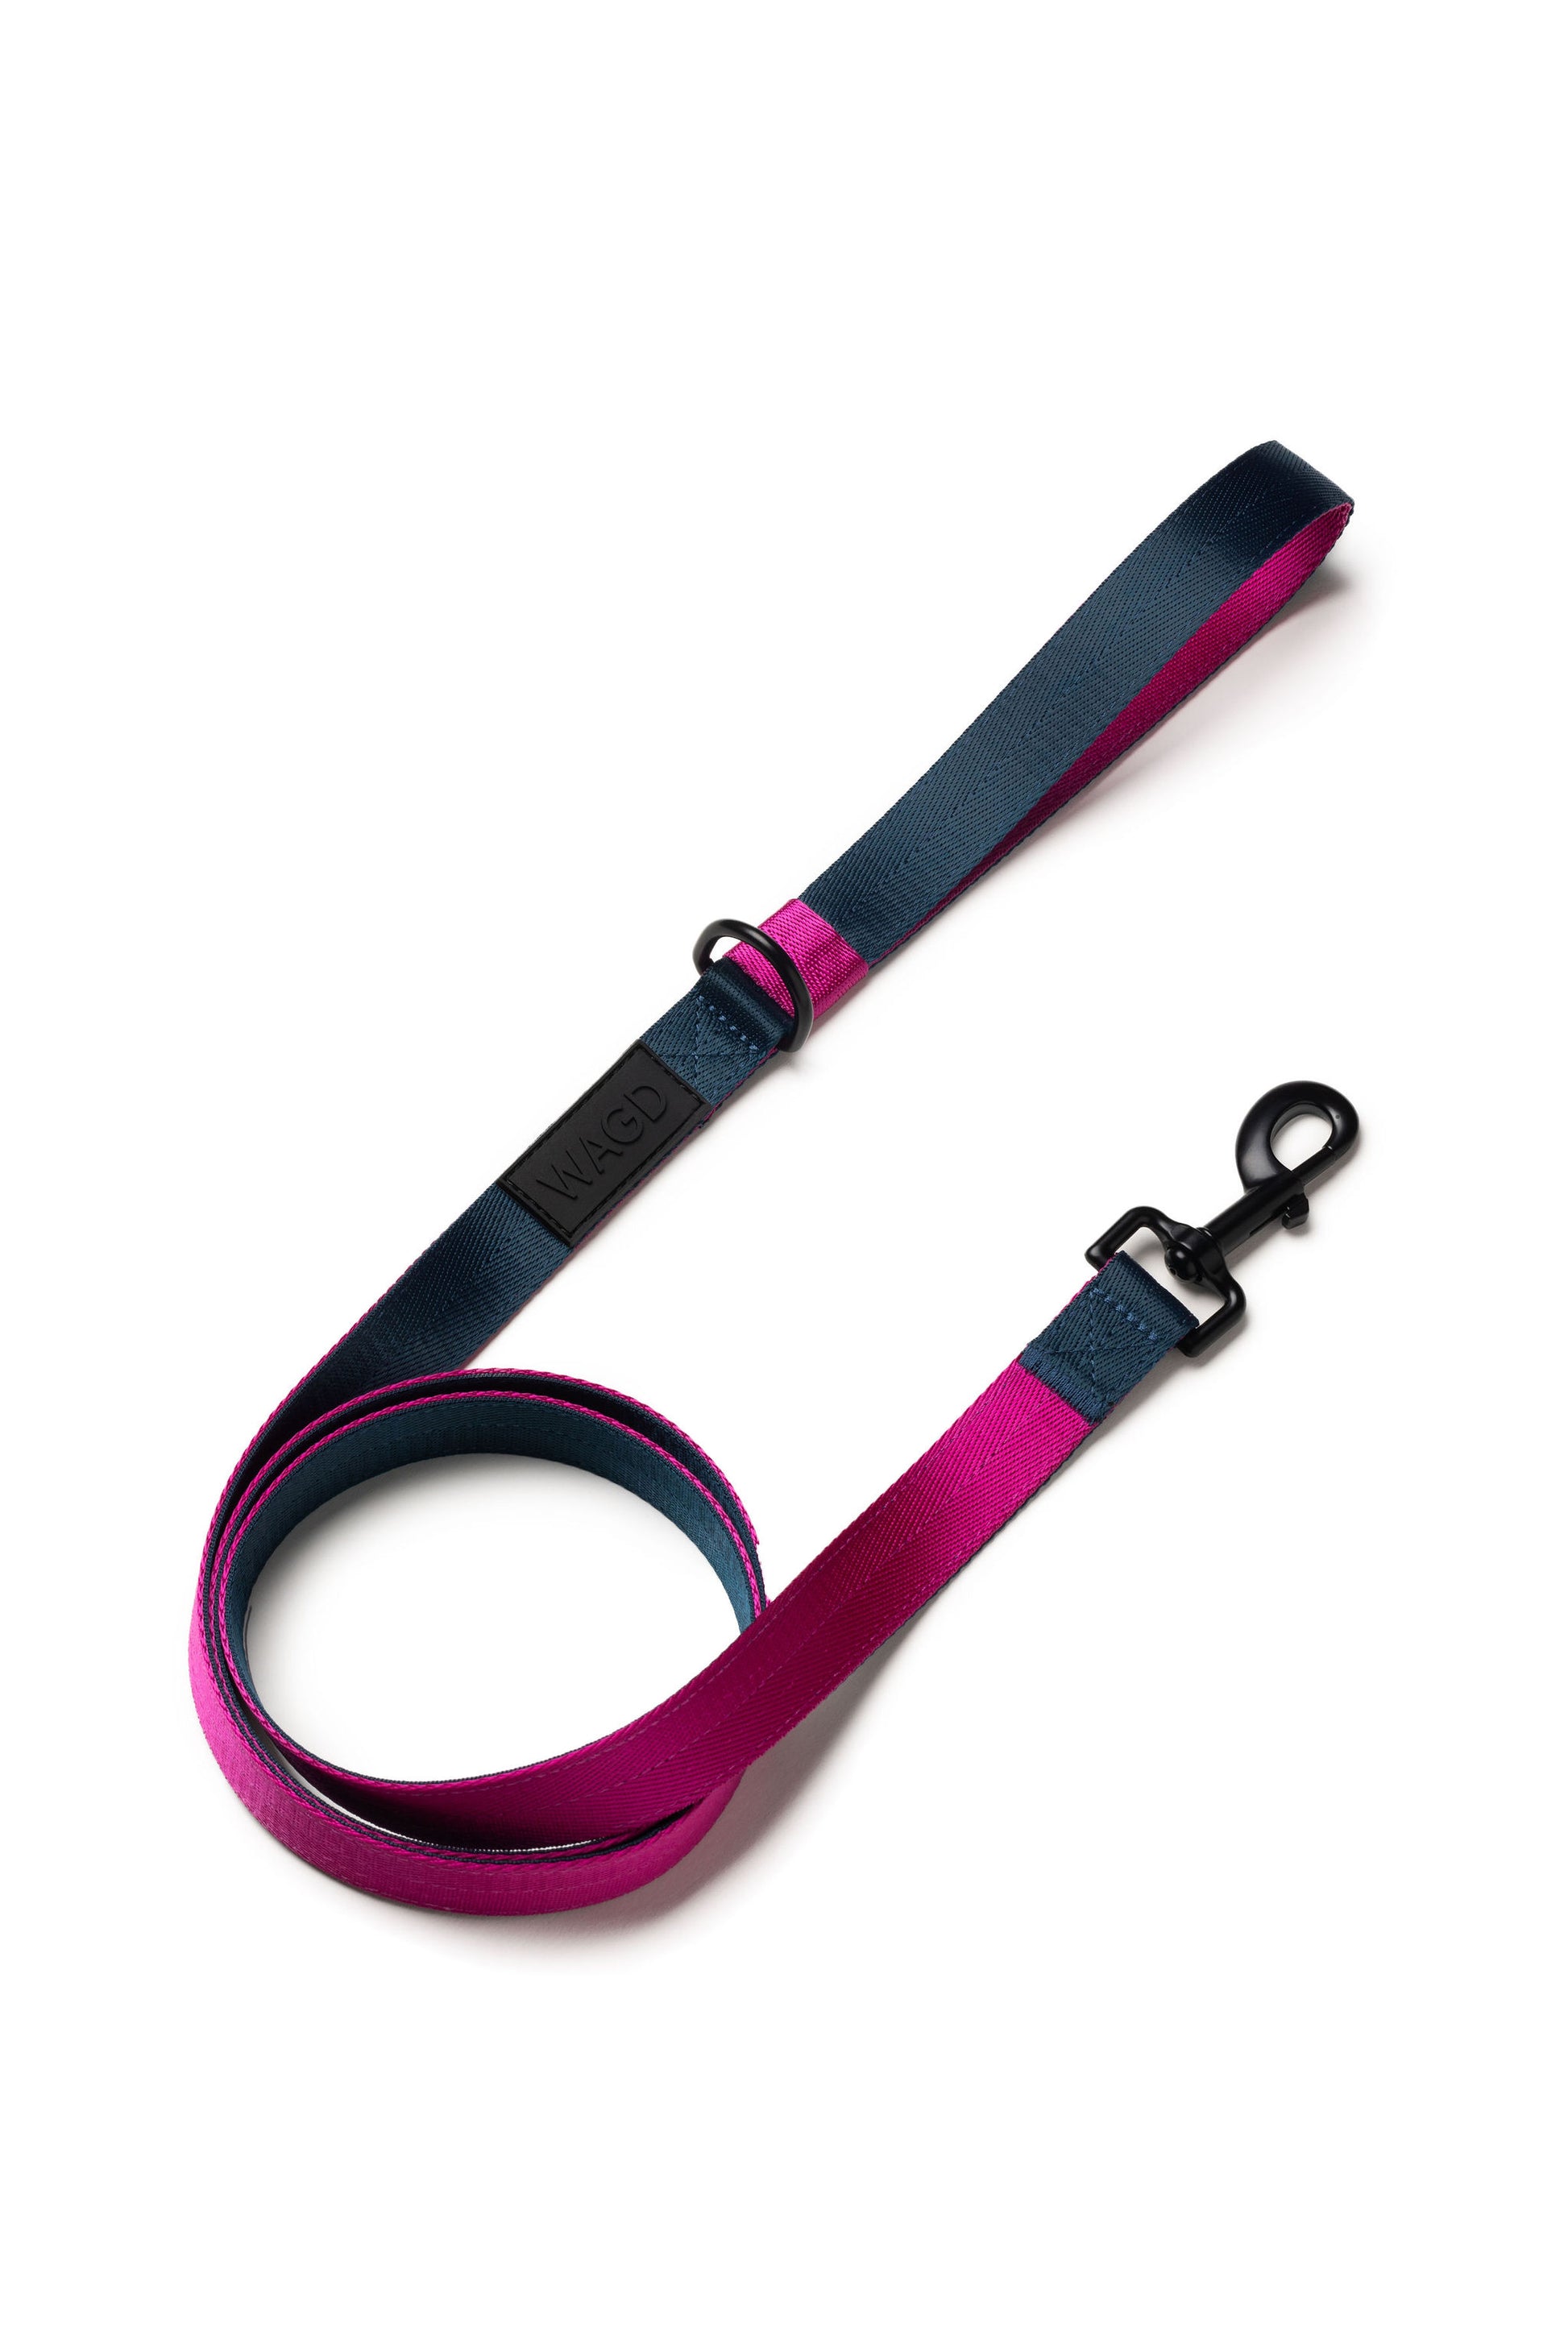 Dog lead in Peacock and pink with black clip and black rubber logo below handle.